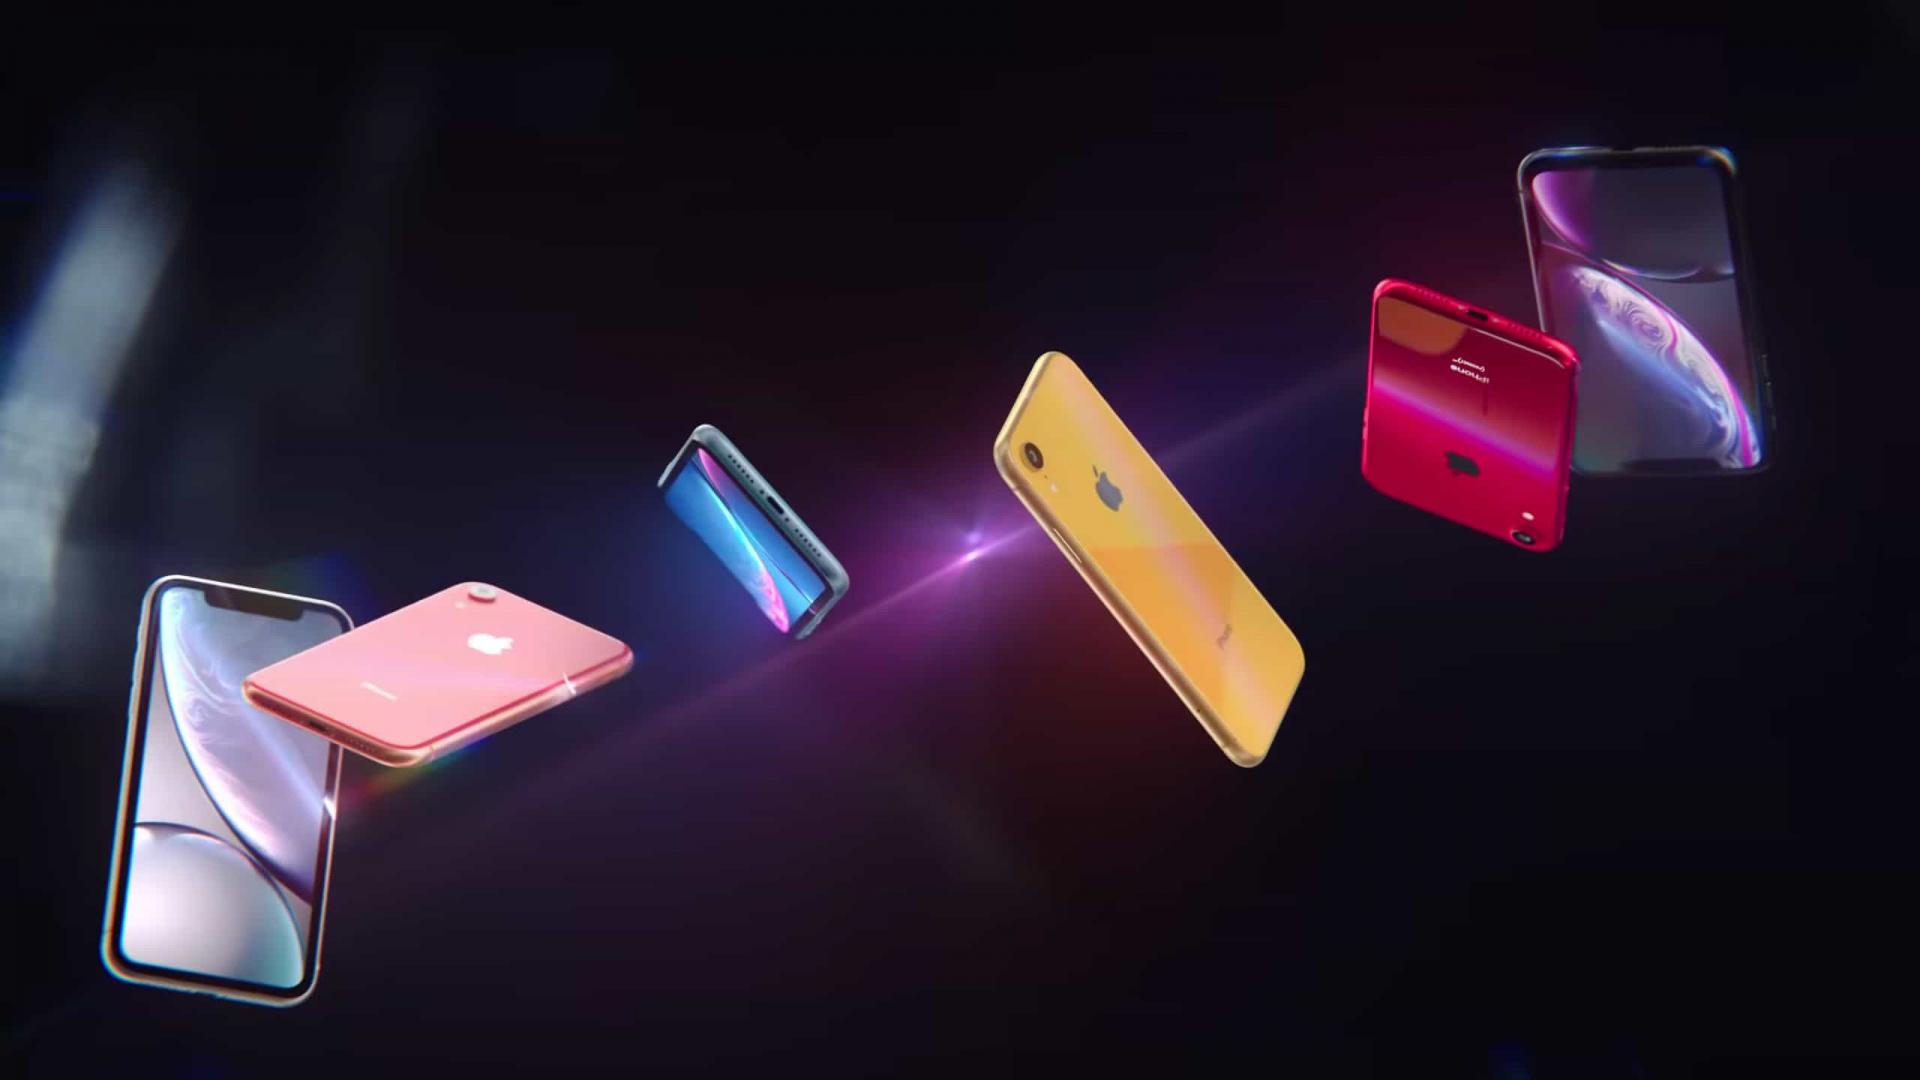 Iphone xr ad